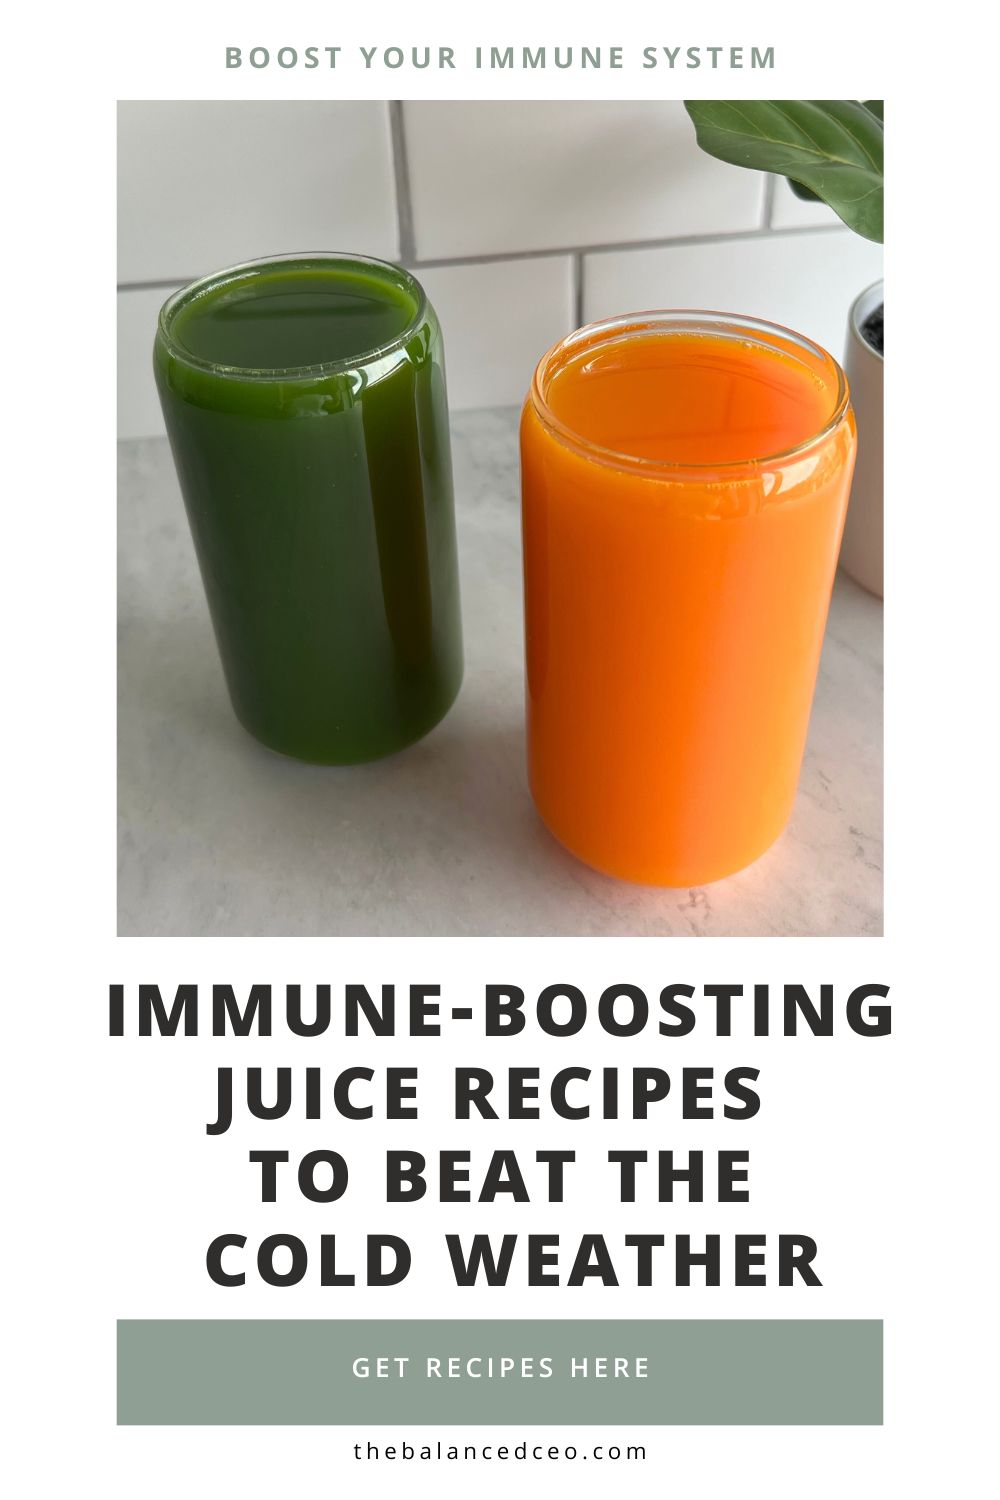 Immune-Boosting Juices to Fight the Cold Weather